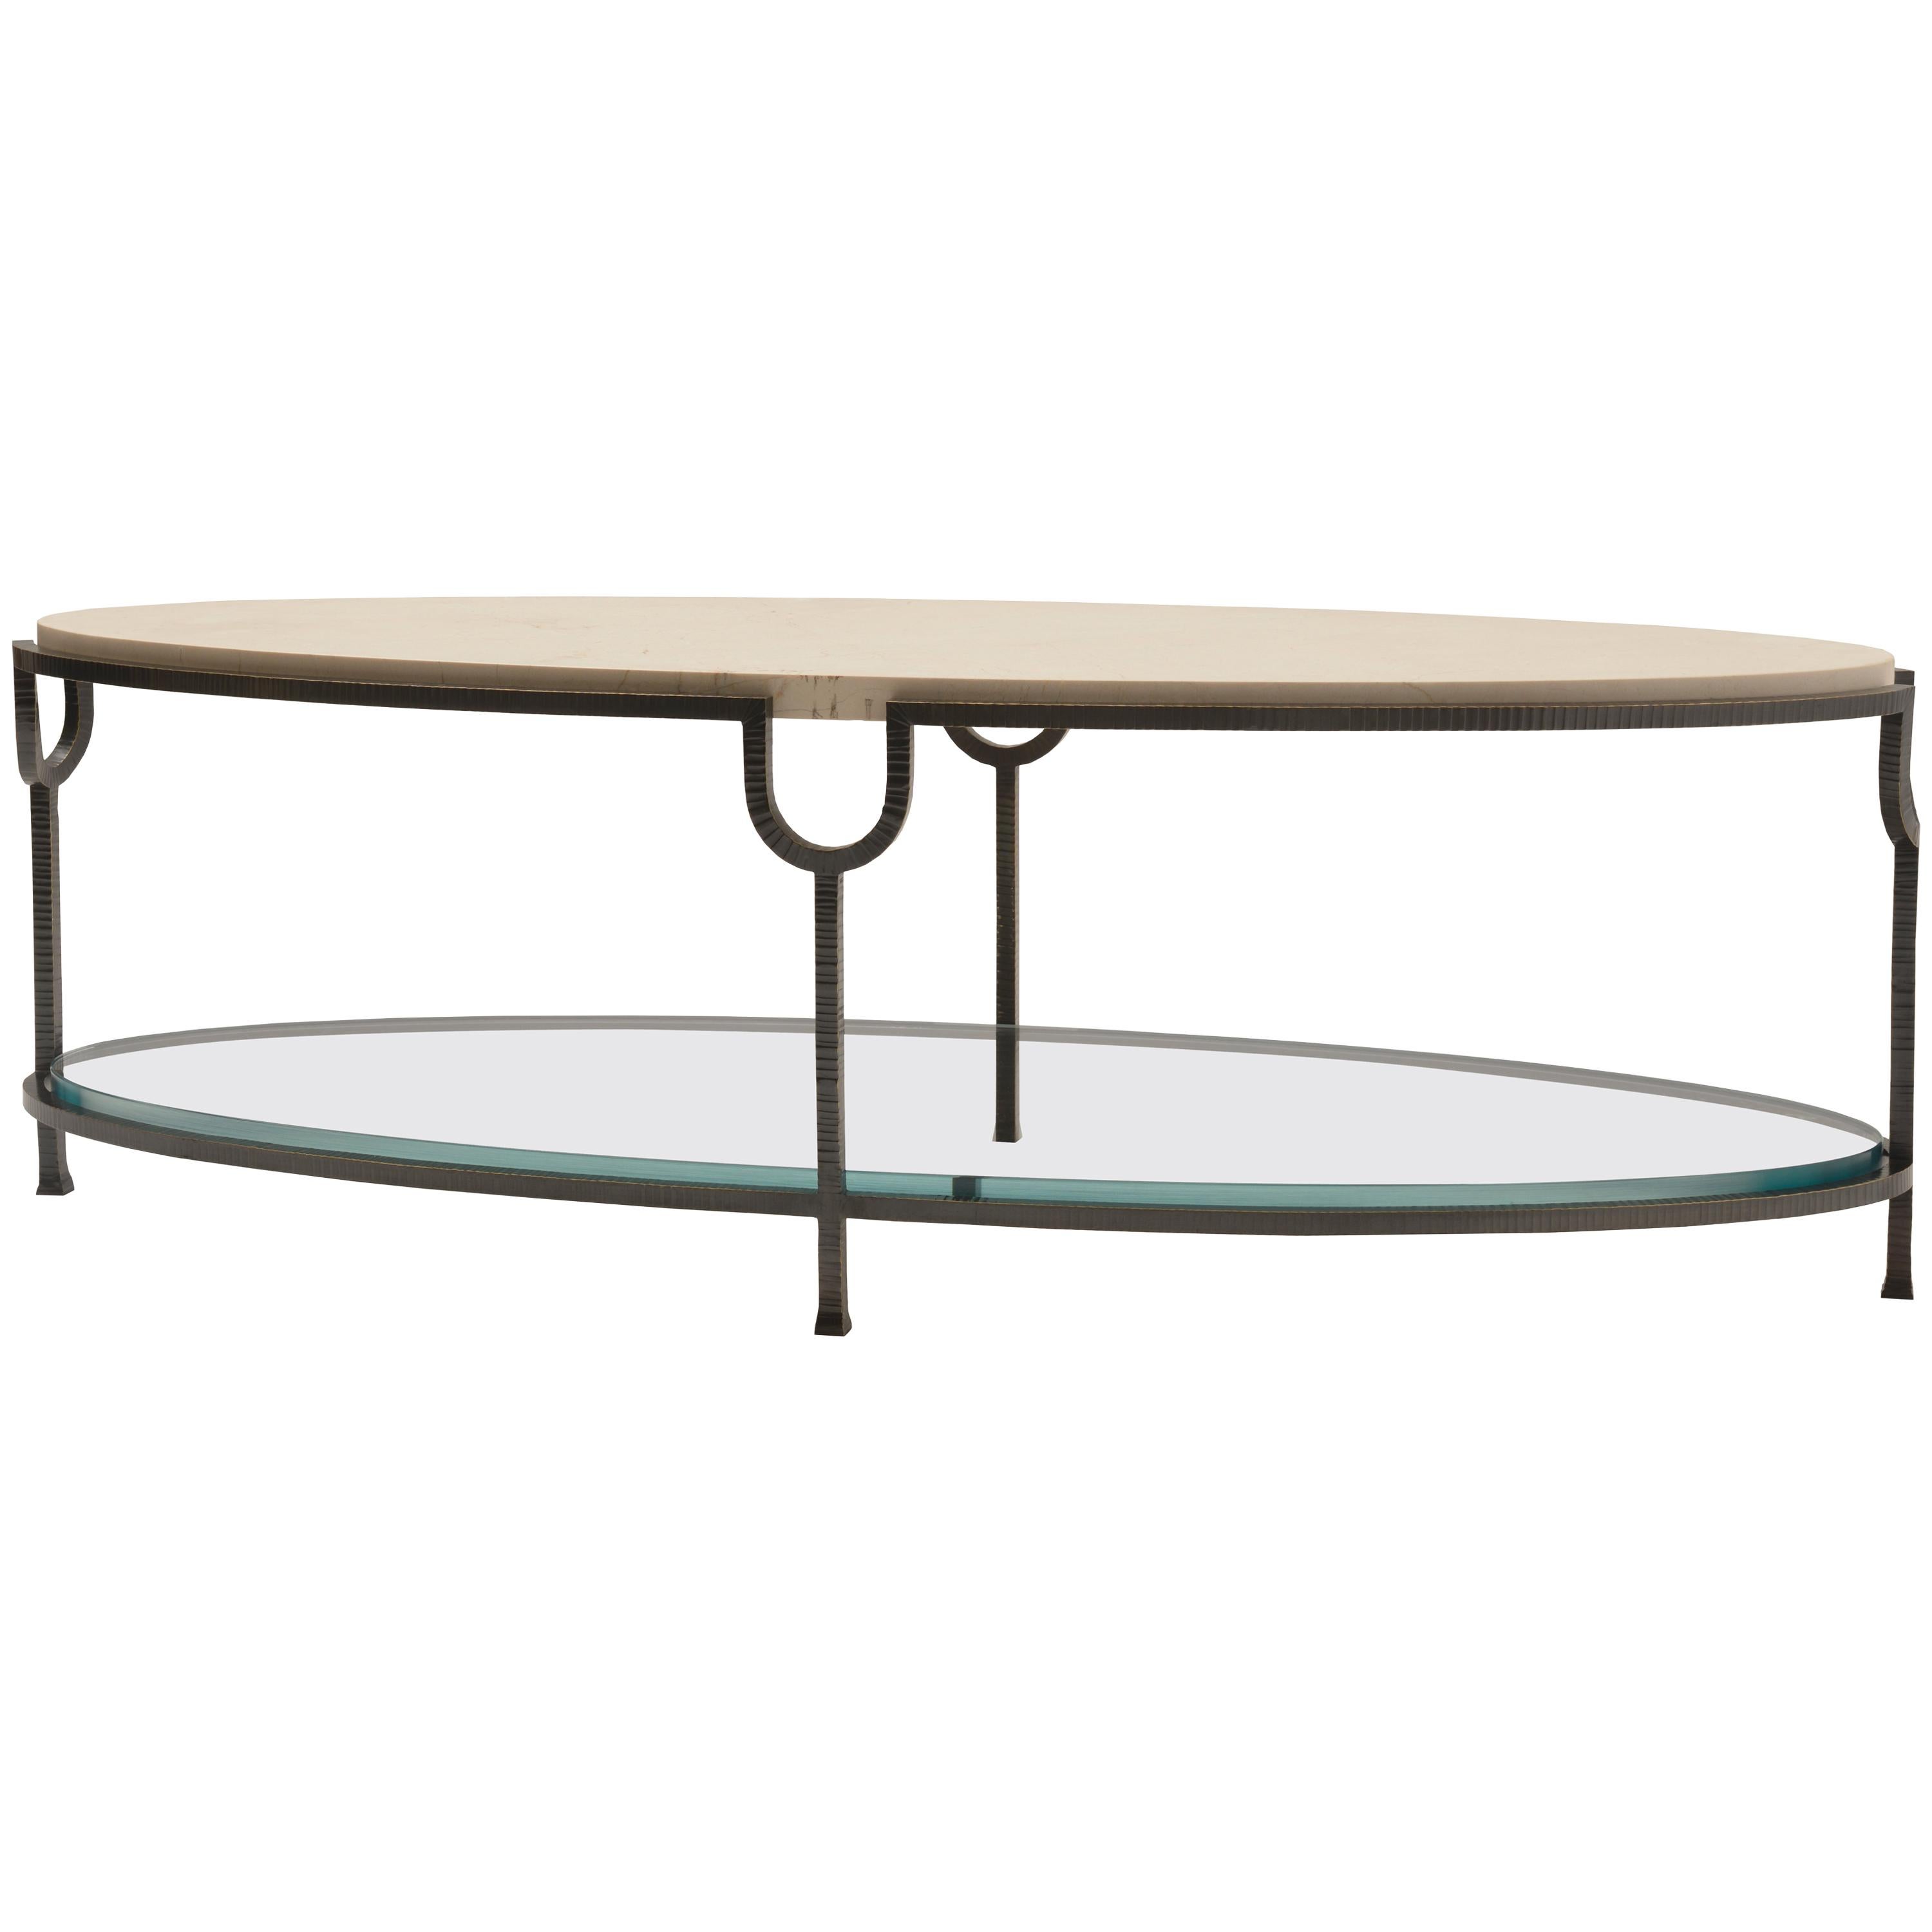 Donghia Inyo Cocktail Table with Marble Top and Glass Shelf For Sale